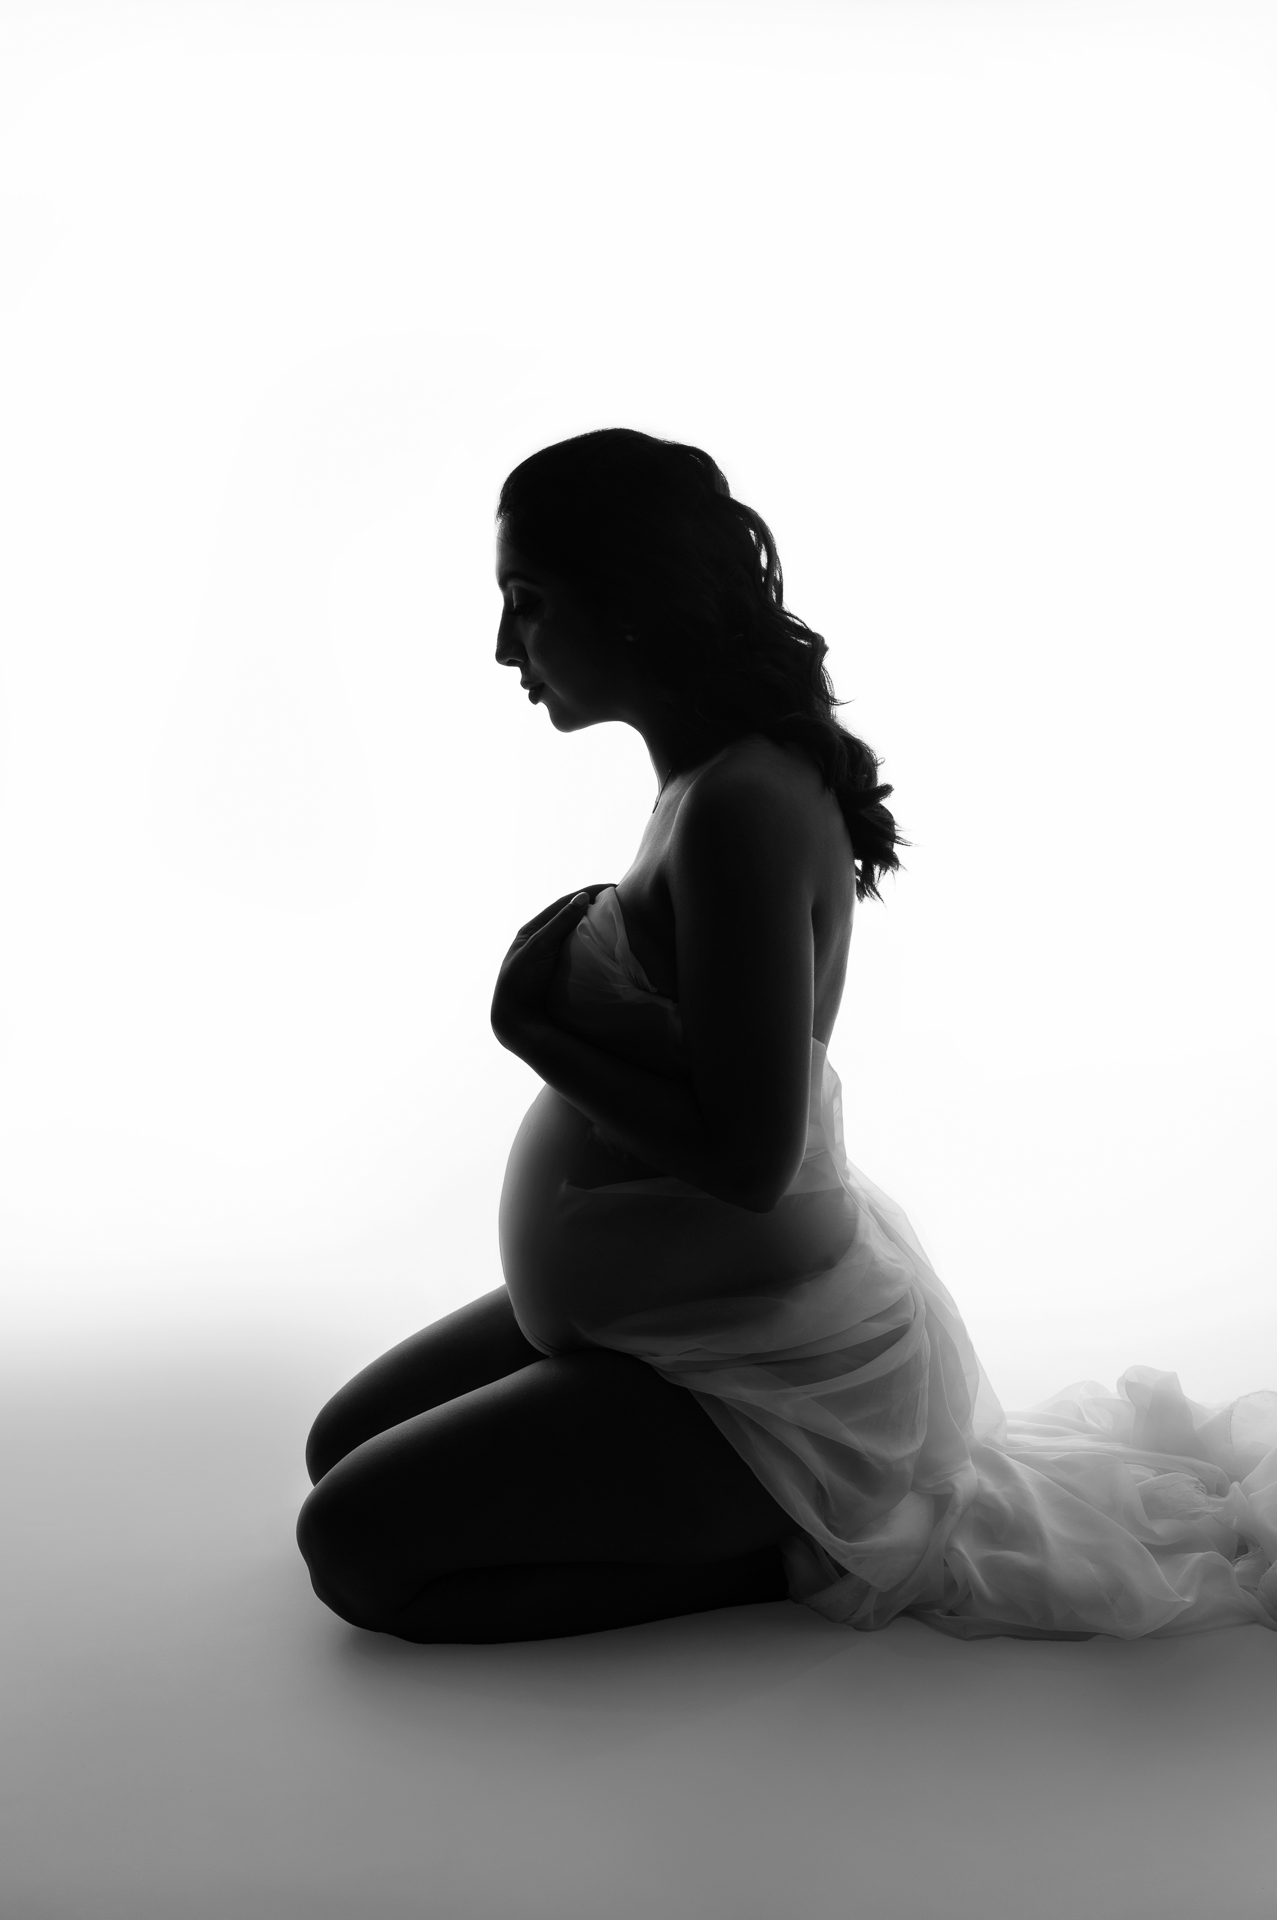 Pregnant woman on her knees covers herself with white fabric, black and white image